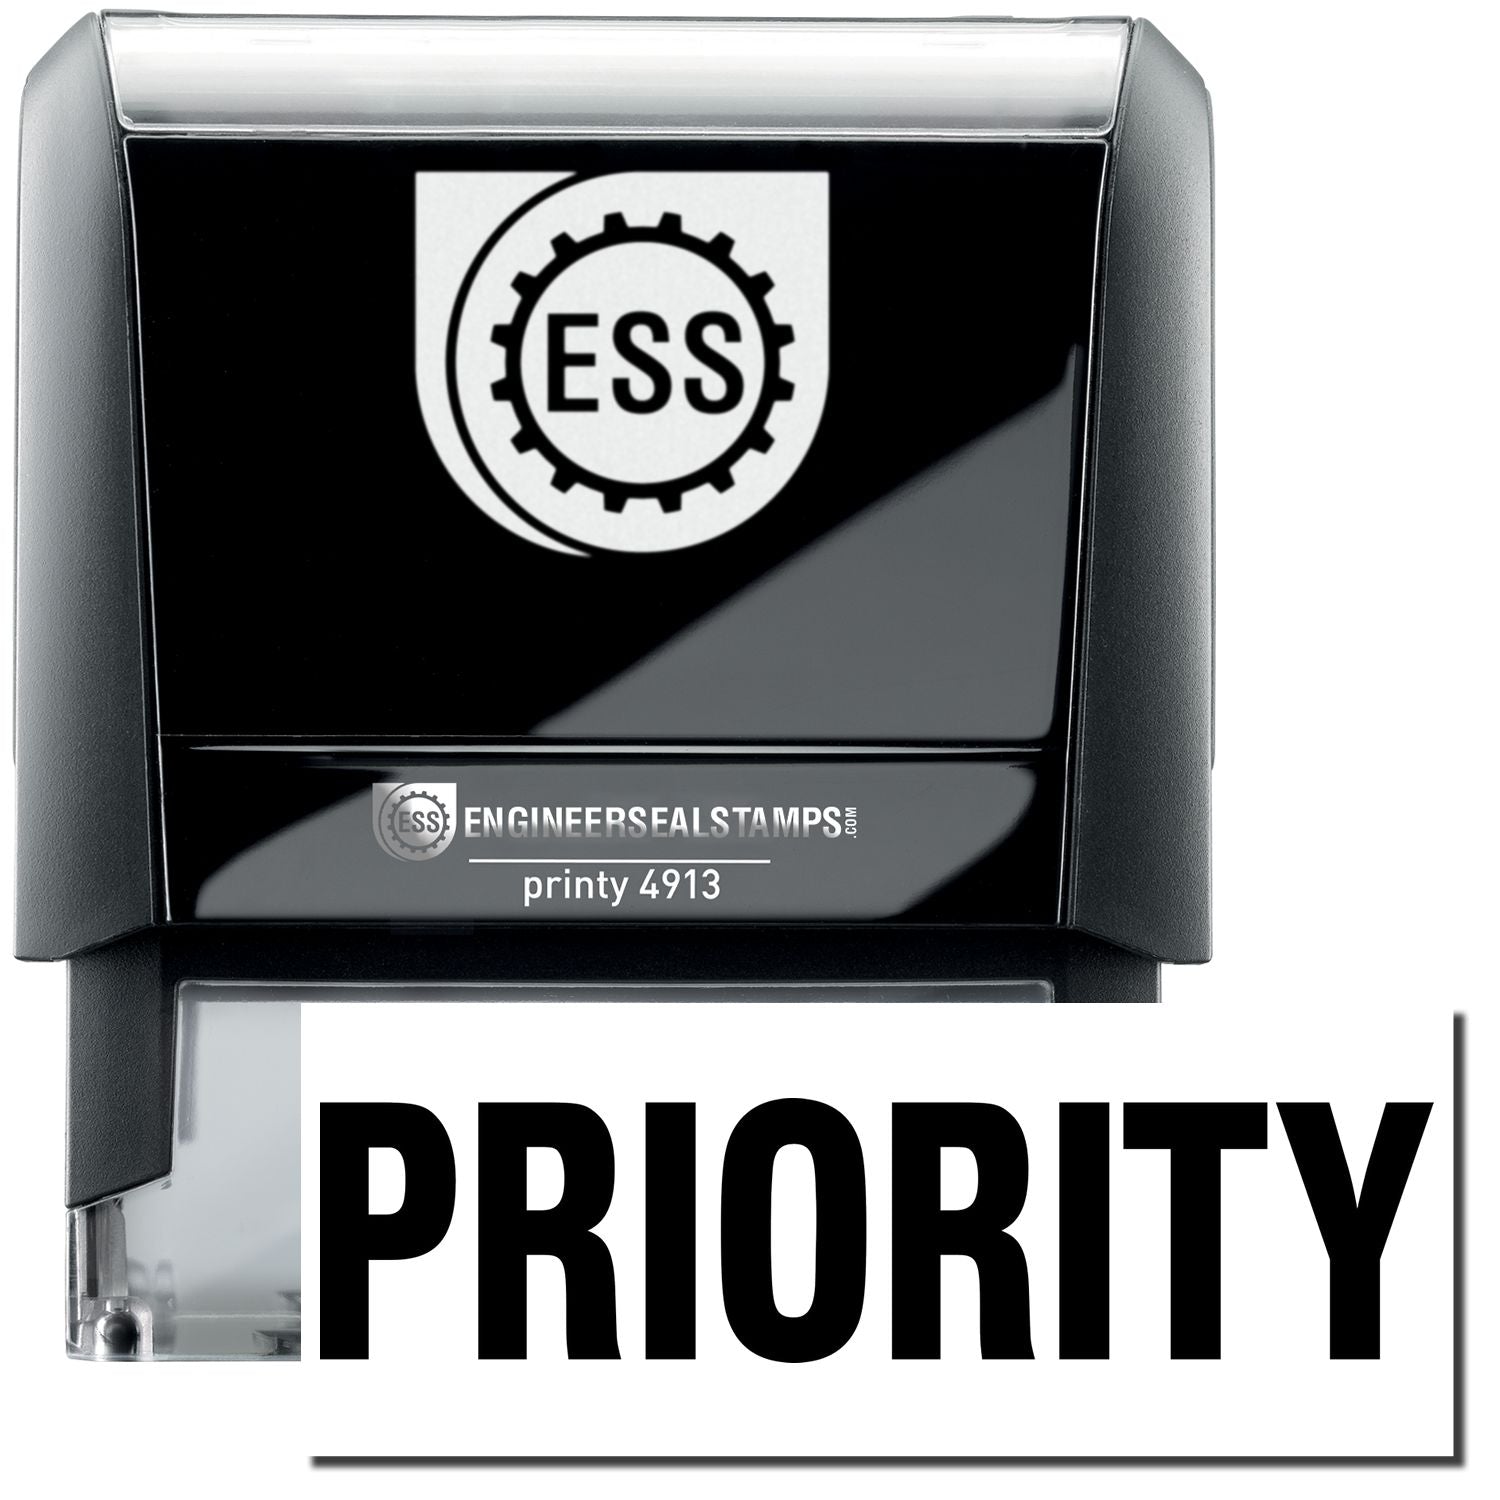 A self-inking stamp with a stamped image showing how the text "PRIORITY" in a large bold font is displayed by it after stamping.